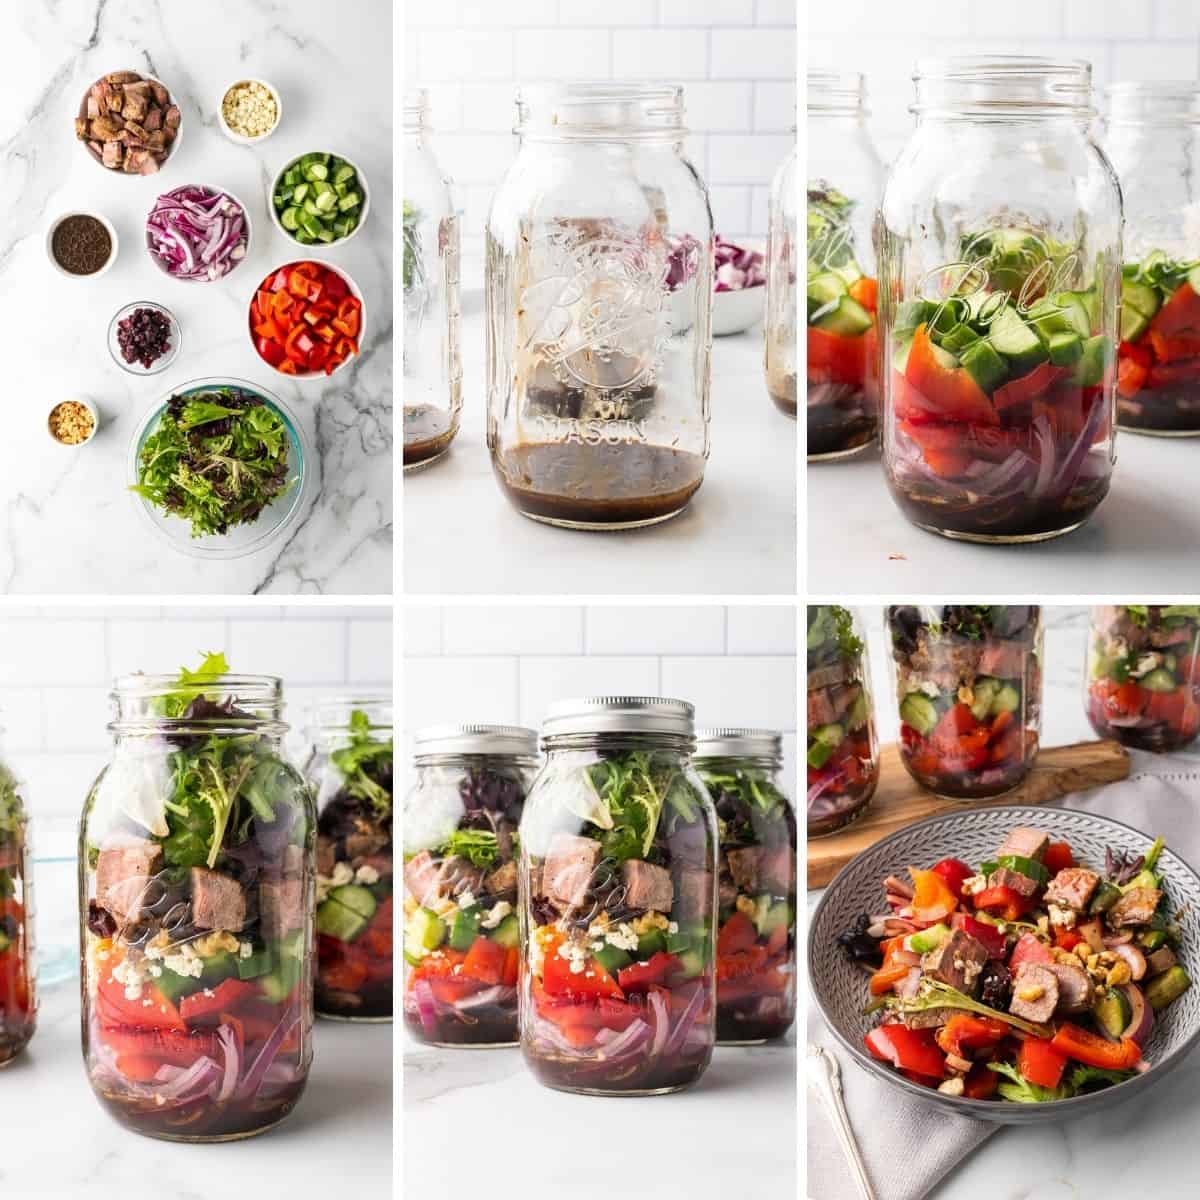 step by step collage showing how to make steak salad in a jar recipe.